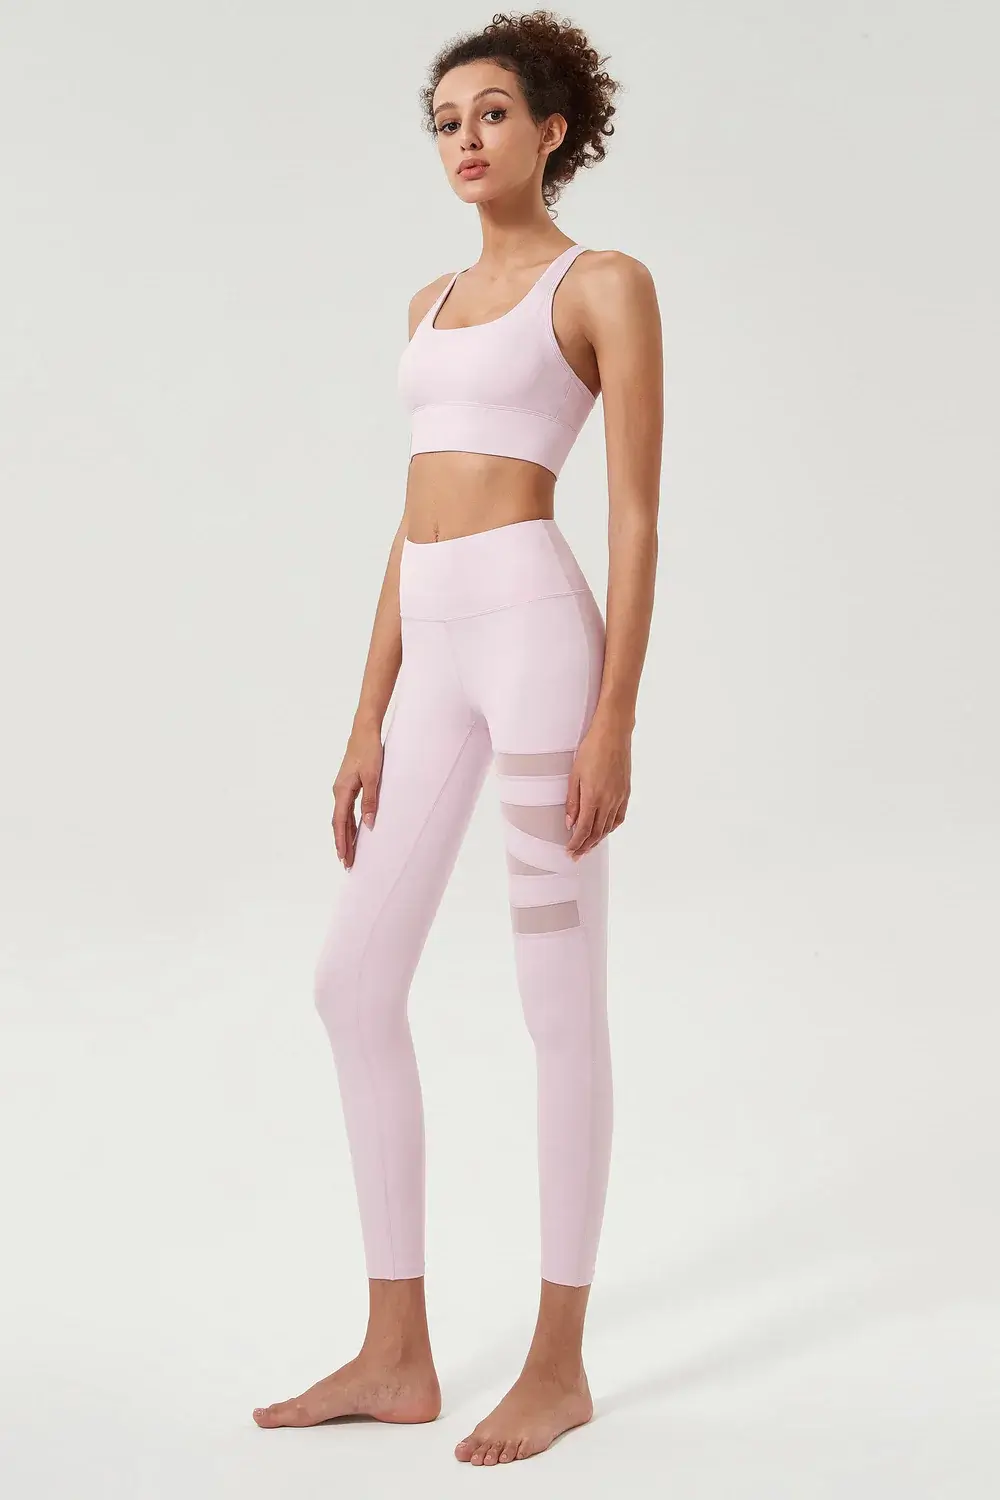 How To Select The Best Joggers Pants For Women – Gymwearmovement